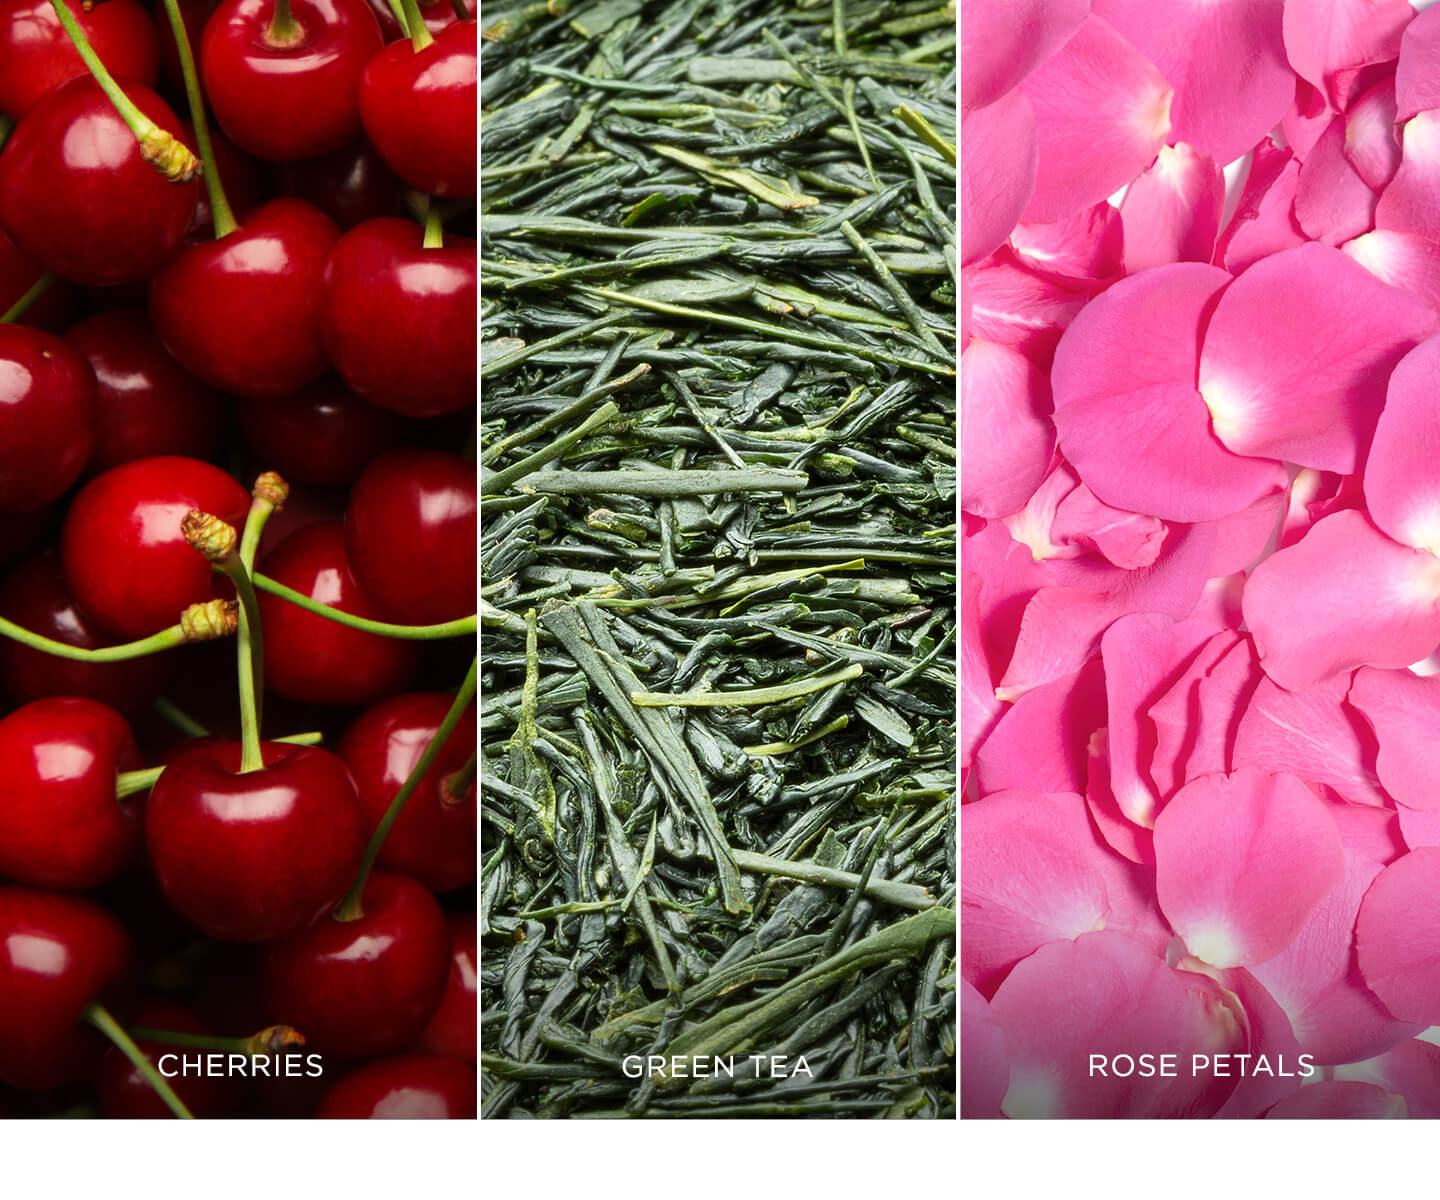 Cherry Blossom ingredients, rose petals, green tea and cherries